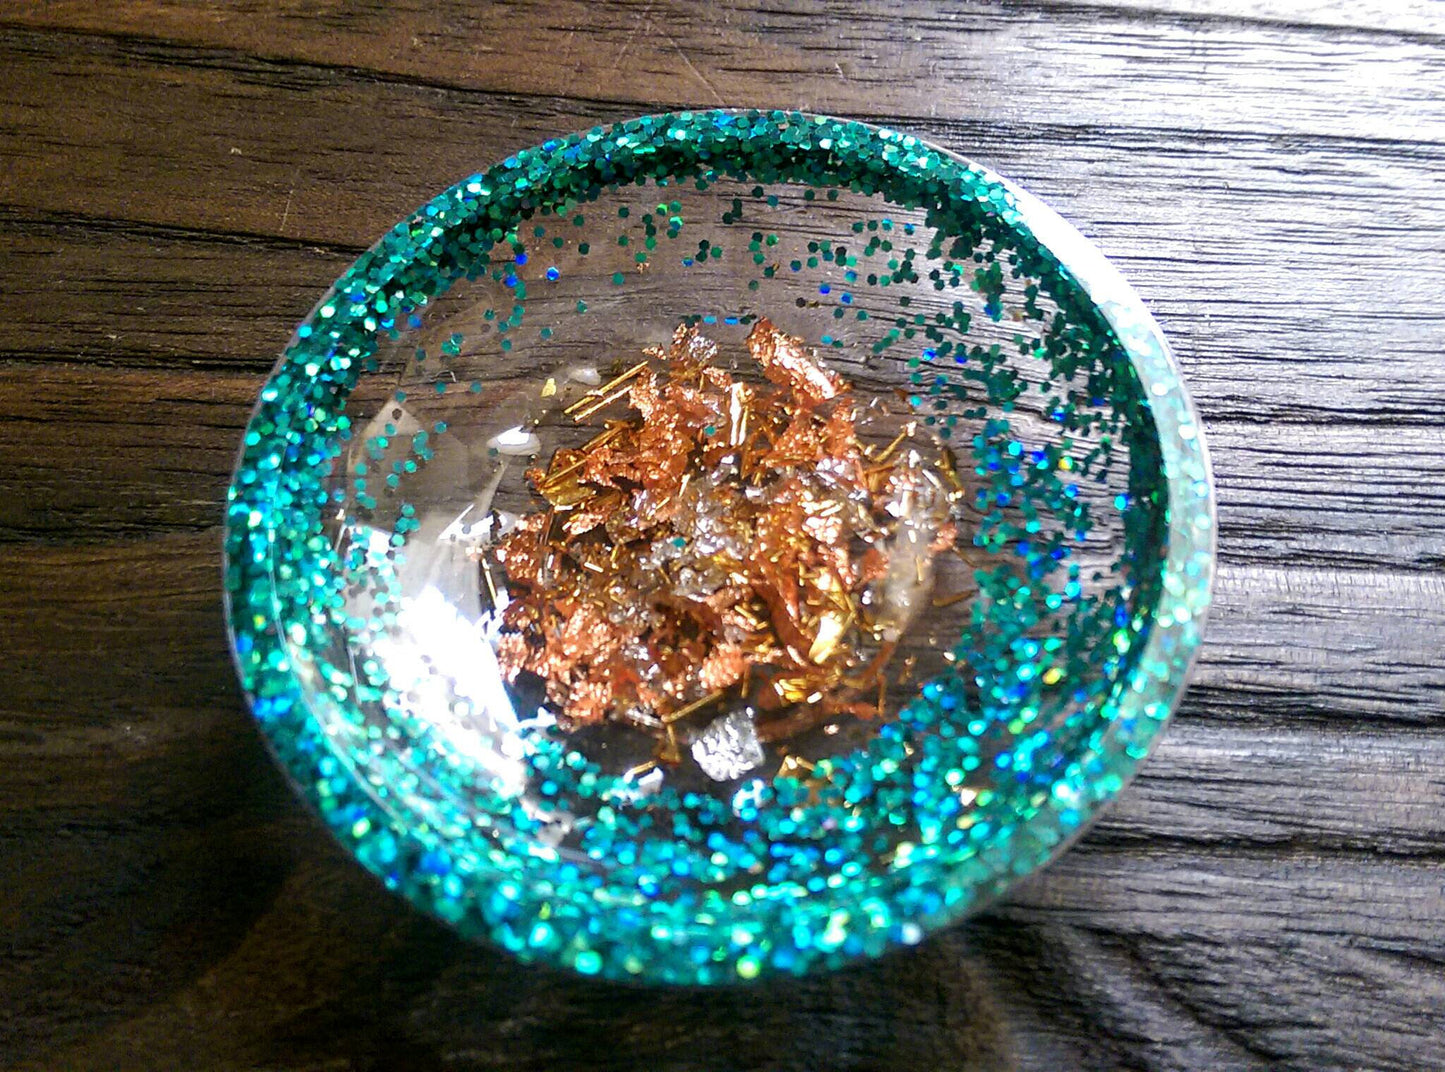 Ring Trinket Dish Turquoise Sparkly Glitter Mixed with Silver, Gold & Rose Gold Leaf - Silver and Resin Designs